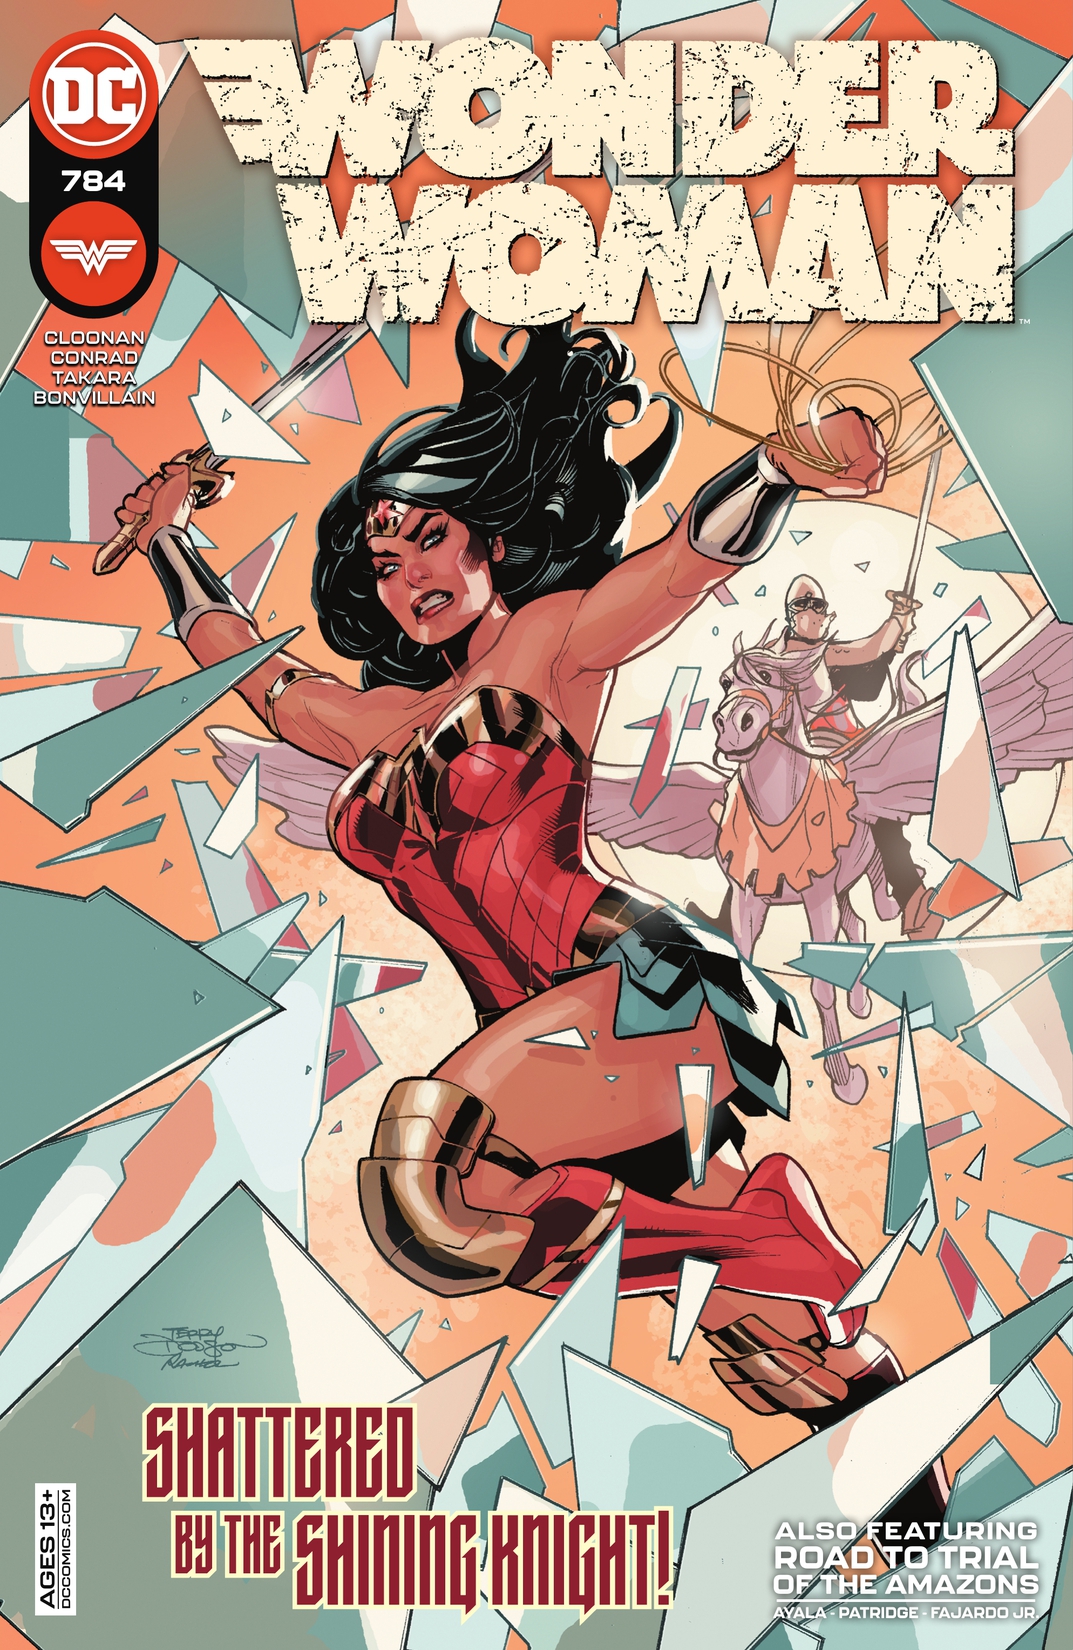 Wonder Woman (2016-) #784 preview images